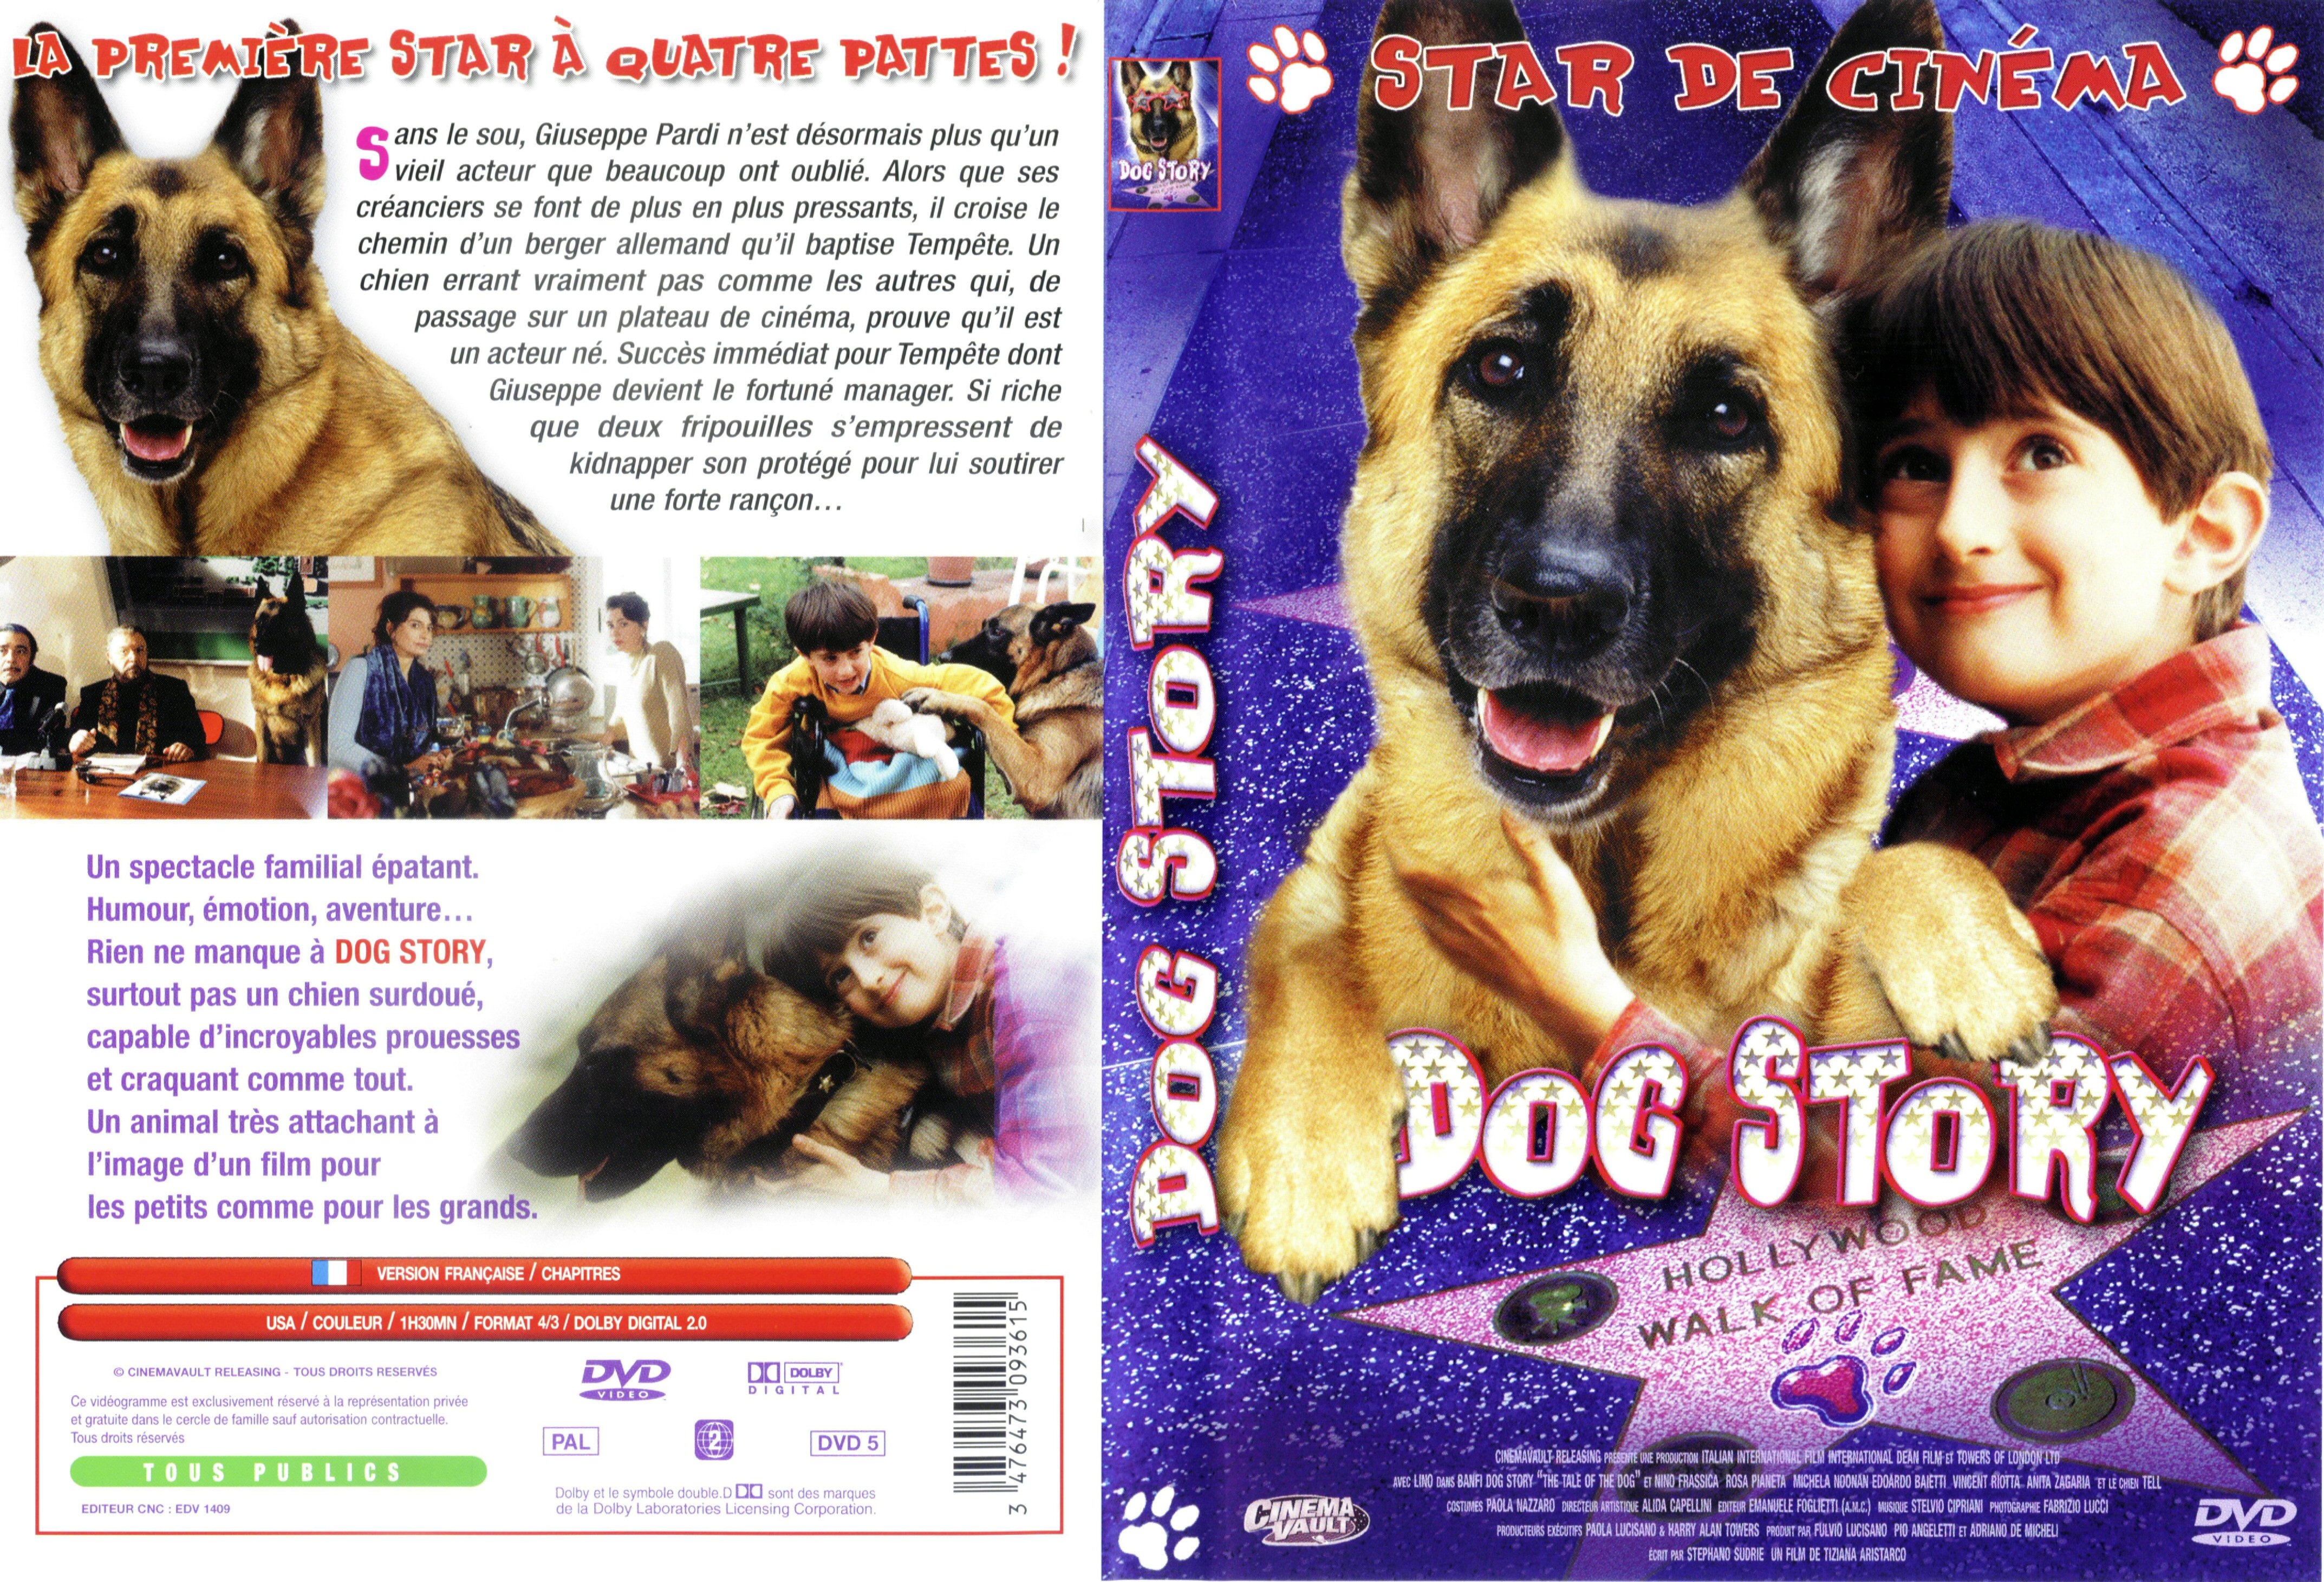 Jaquette DVD Dog story